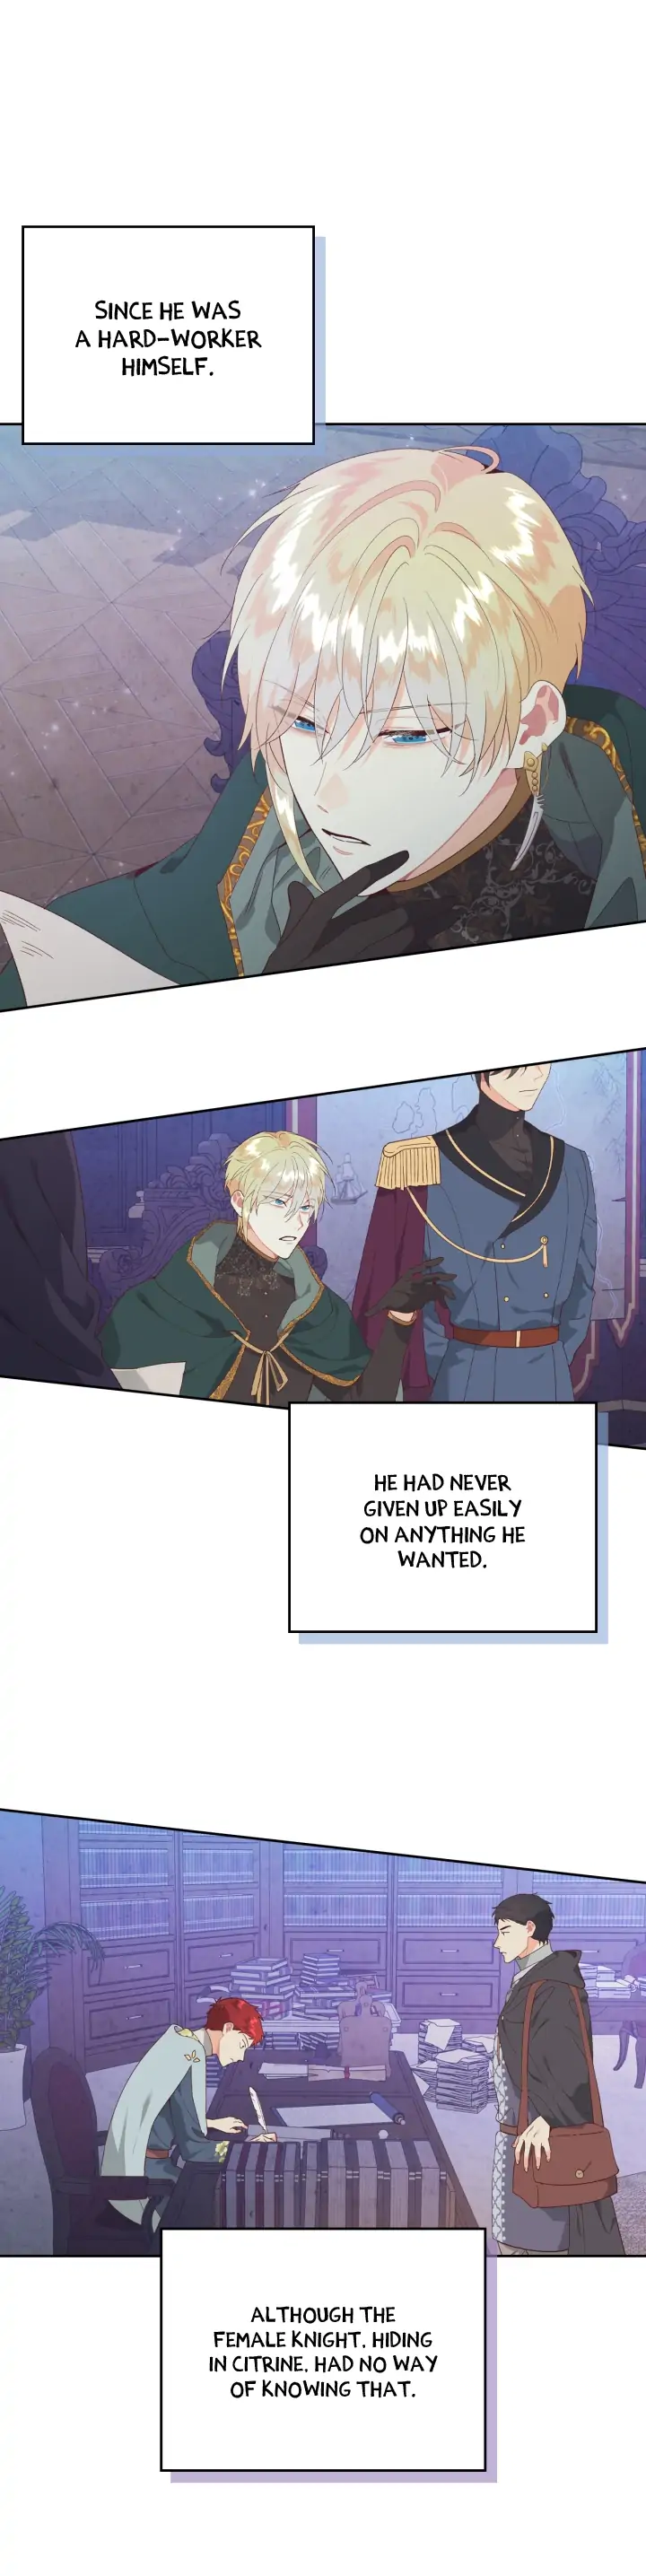 Emperor And The Female Knight - Chapter 191 Page 25